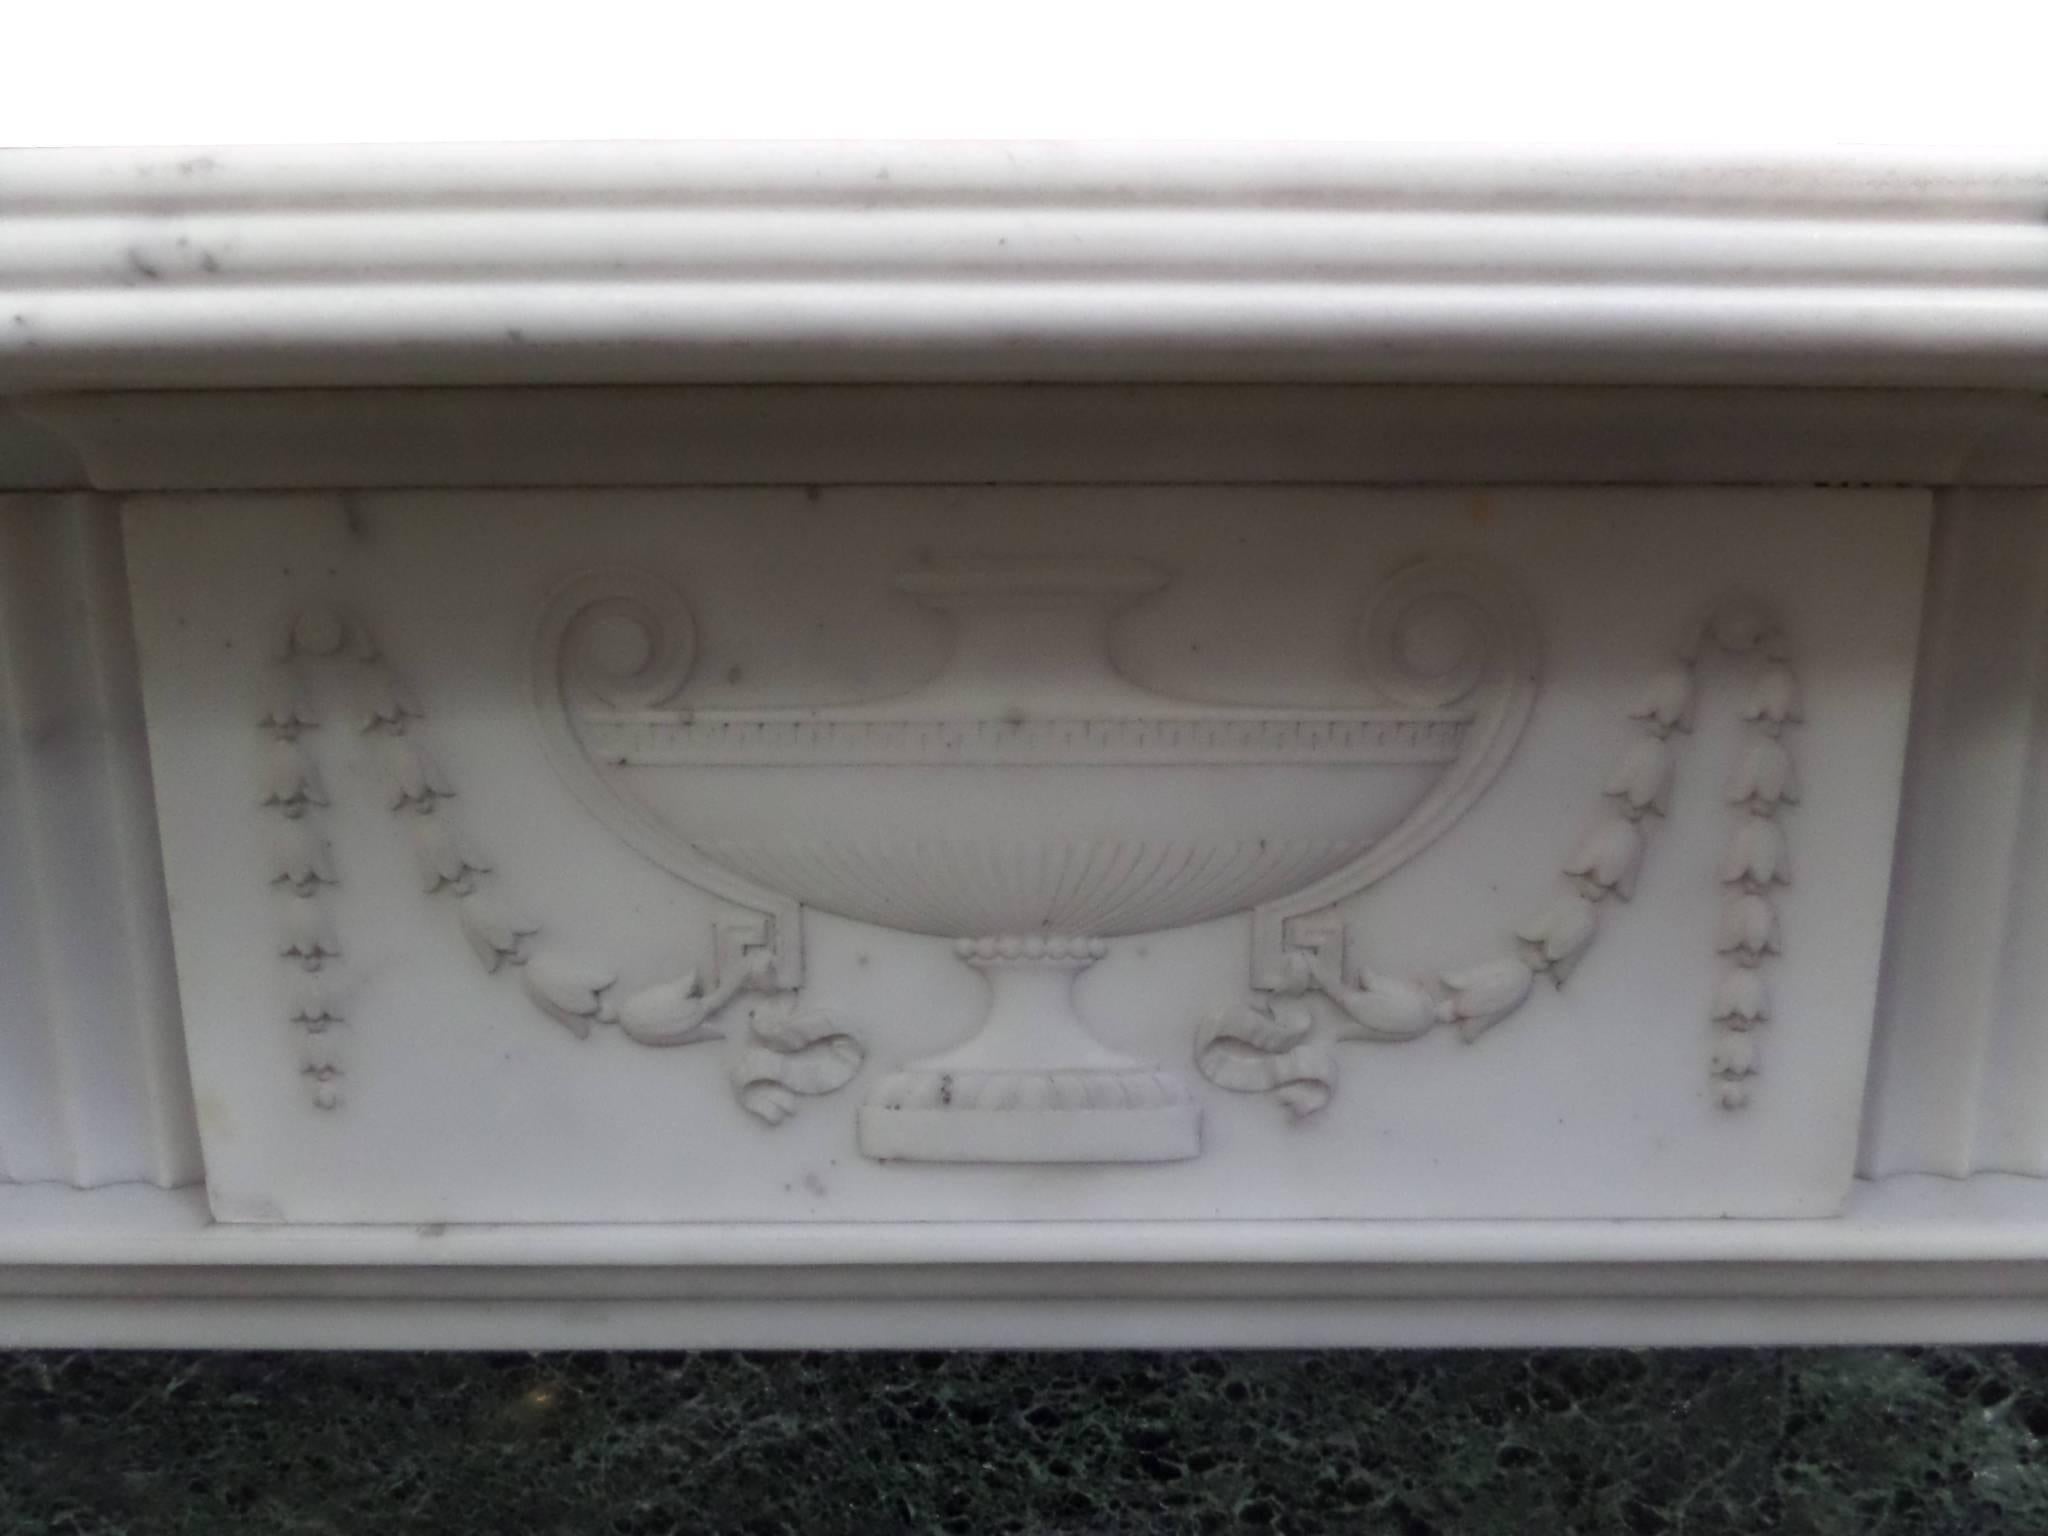 Antique restored Georgian marble surround, a fine antique Georgian statuary marble surround with green Connemara slips, the capitals and the frieze are decorated with carved urns leading up to a traditional bird beak shelf, circa 1890. This